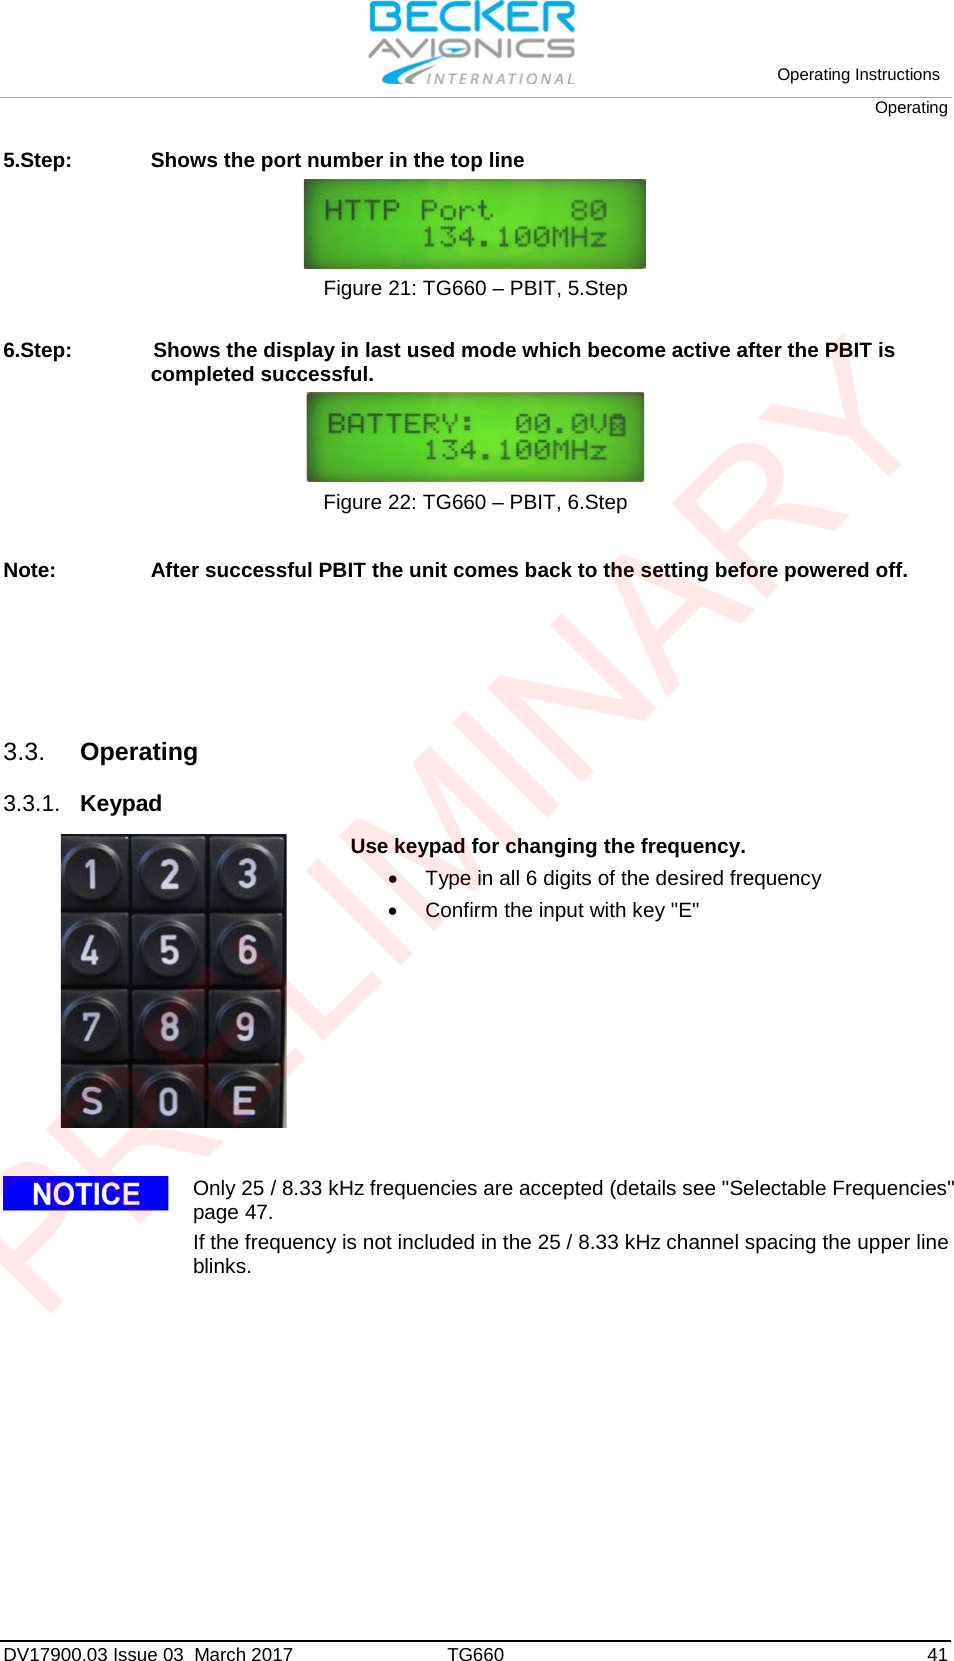 Operating Instructions Operating DV17900.03 Issue 03  March 2017 TG660 41 5.Step: Shows the port number in the top line Figure 21: TG660 – PBIT, 5.Step  6.Step:  Shows the display in last used mode which become active after the PBIT is completed successful. Figure 22: TG660 – PBIT, 6.Step Note: After successful PBIT the unit comes back to the setting before powered off. 3.3. Operating 3.3.1. Keypad  Use keypad for changing the frequency. •Type in all 6 digits of the desired frequency•Confirm the input with key &quot;E&quot;Only 25 / 8.33 kHz frequencies are accepted (details see &quot;Selectable Frequencies&quot; page 47. If the frequency is not included in the 25 / 8.33 kHz channel spacing the upper line blinks. PRELIMINARY